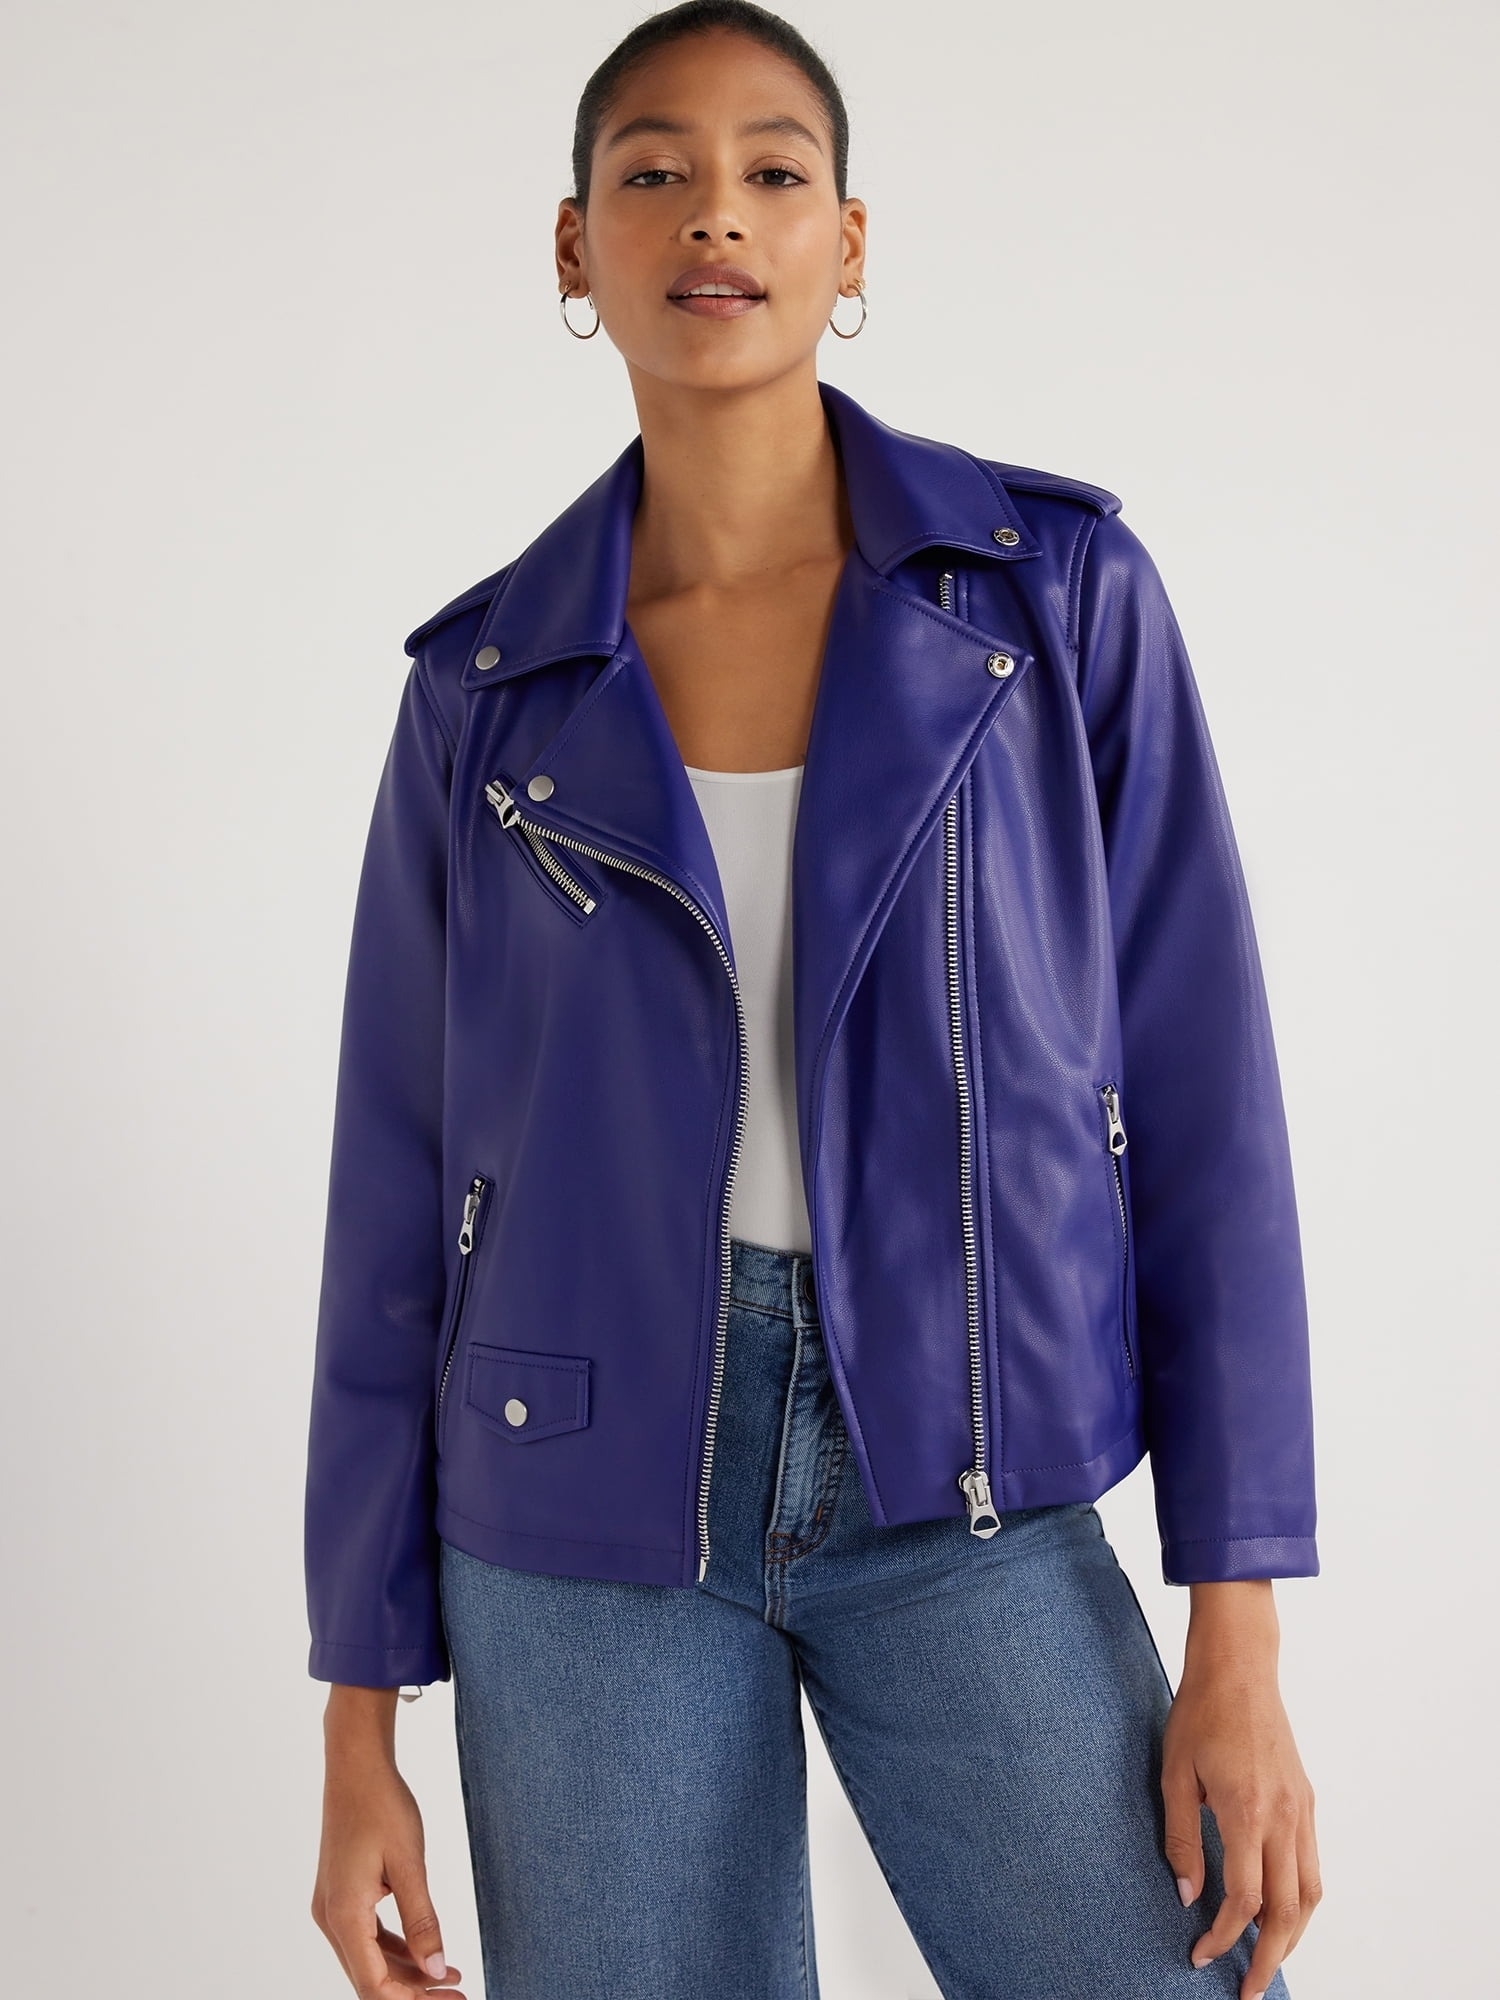 model in a blue purple leather jacket and jeans, showcasing a casual yet stylish outfit